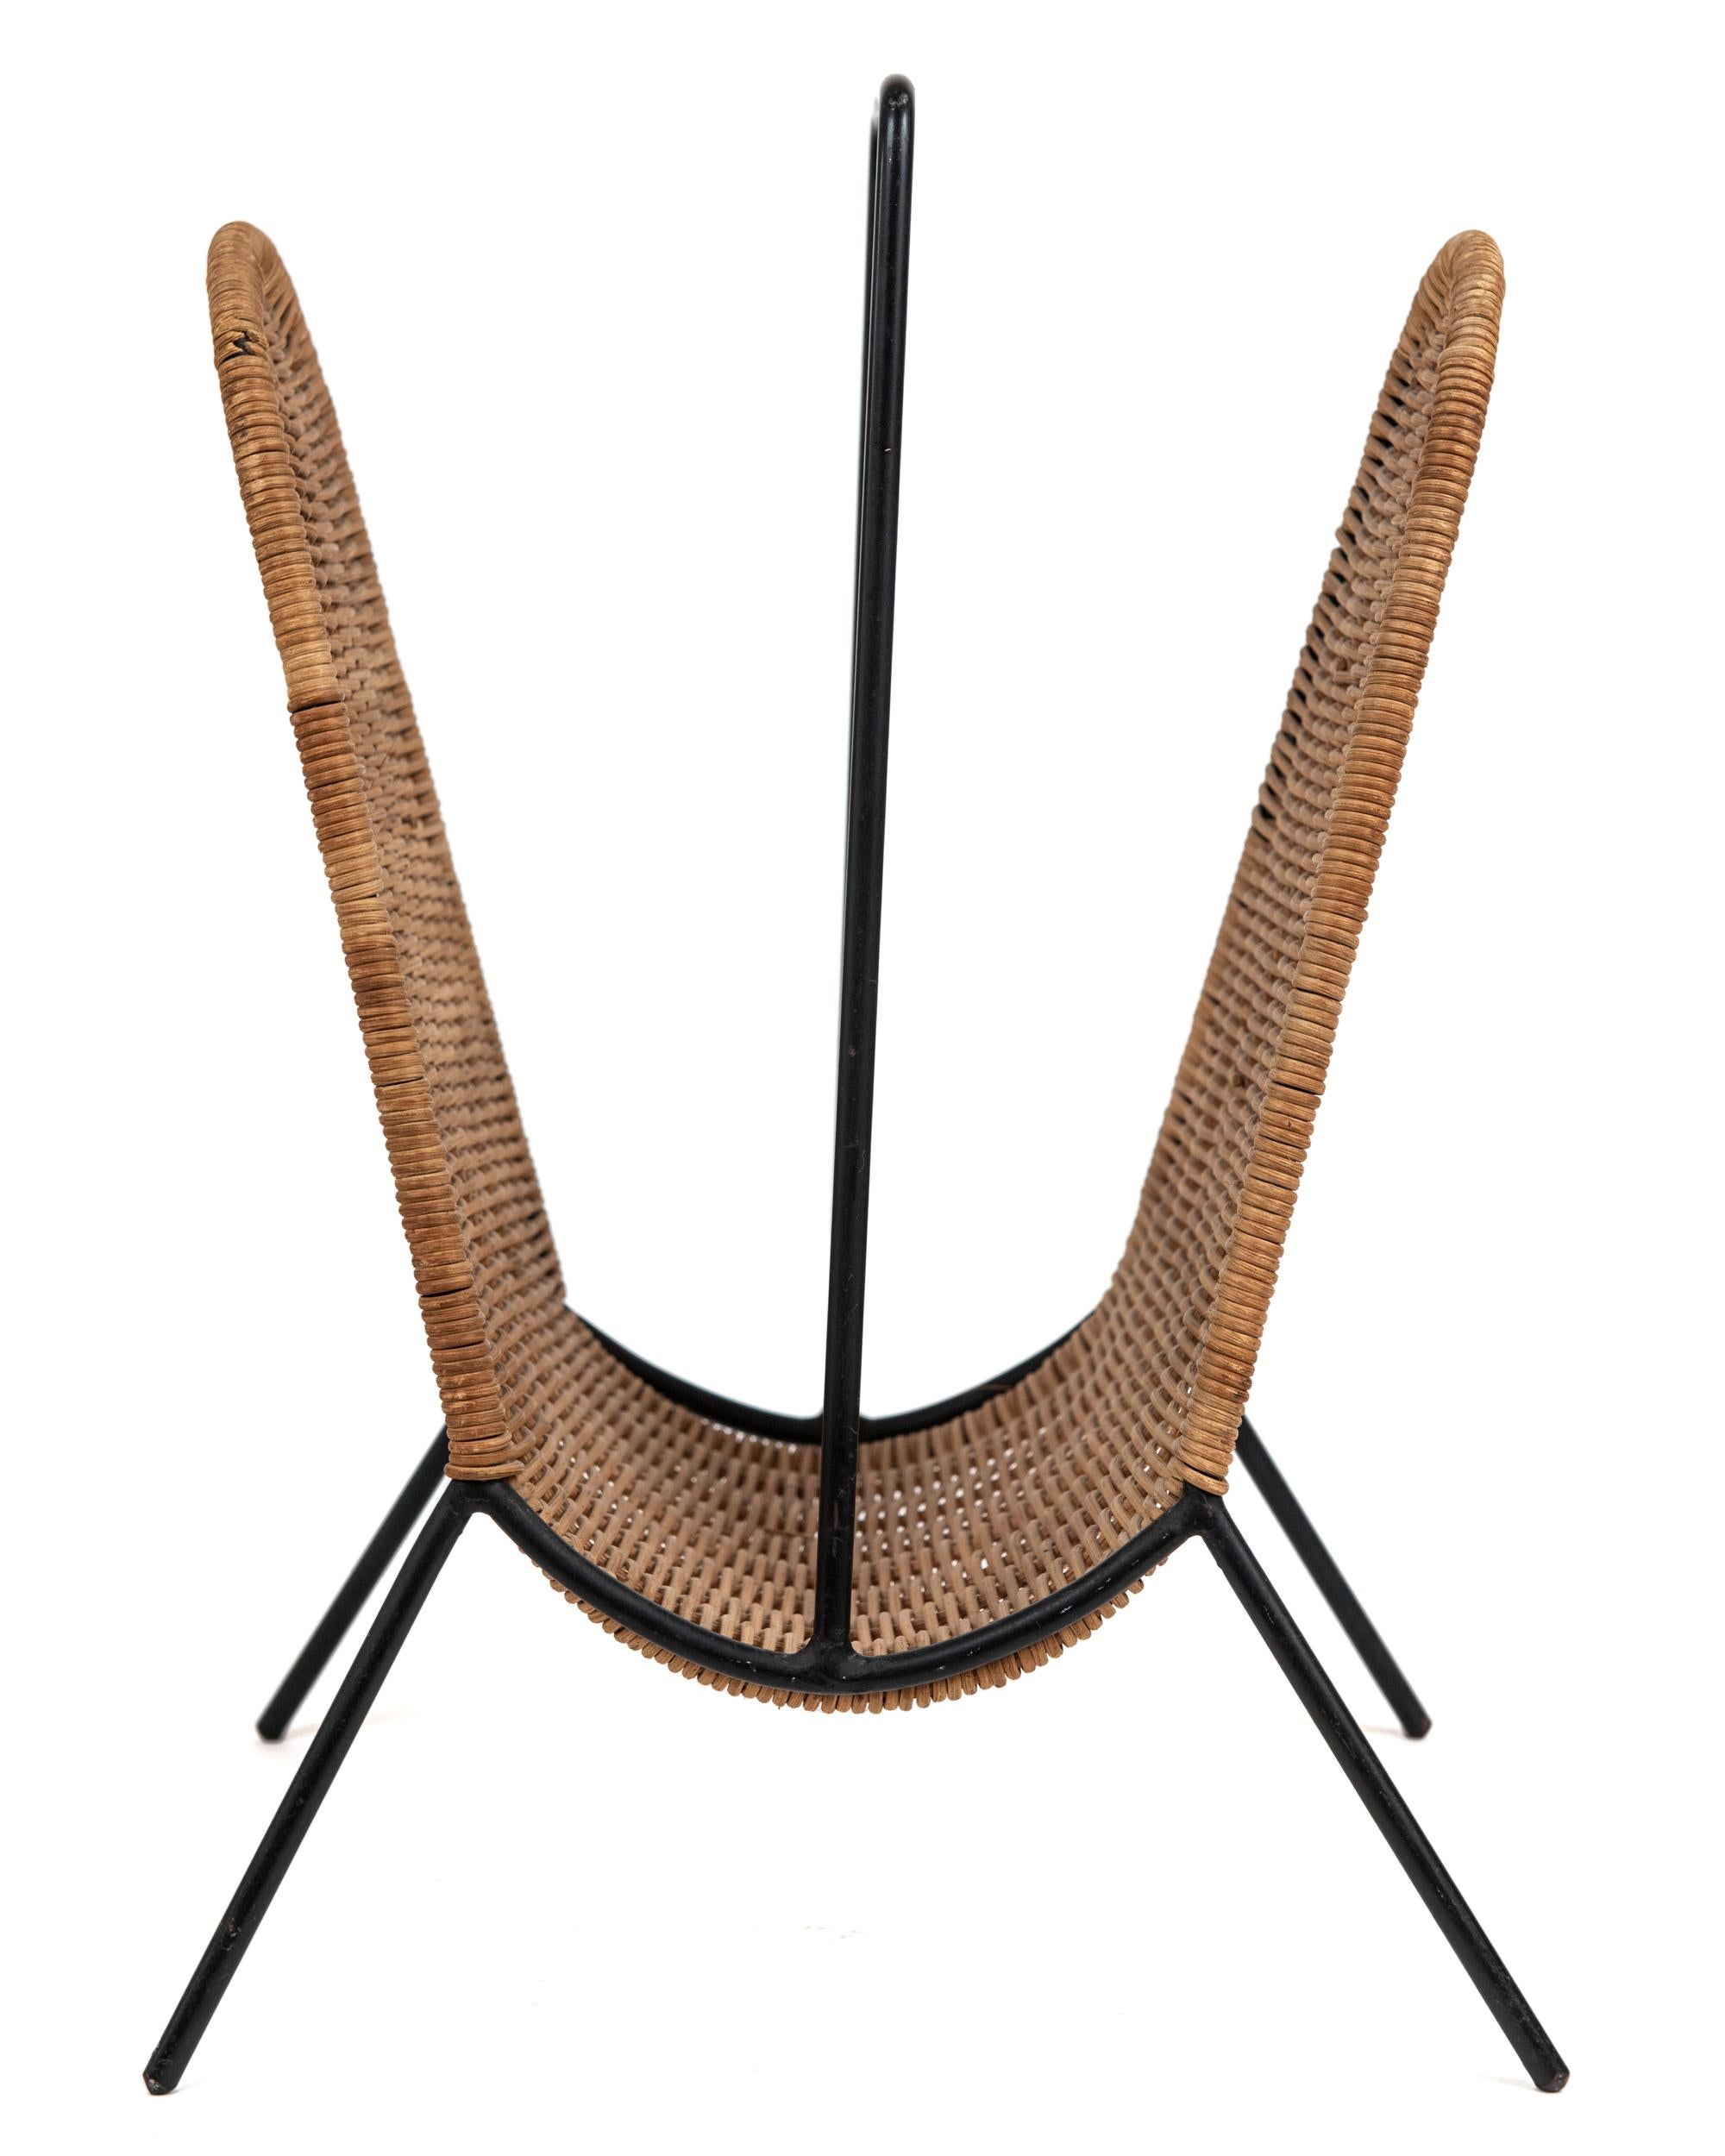 A cool and rare black wrought iron and rattan magazine stand attributed to Austrian modernist designer Carl Aubock. I love this piece for its sculptural simplicity.